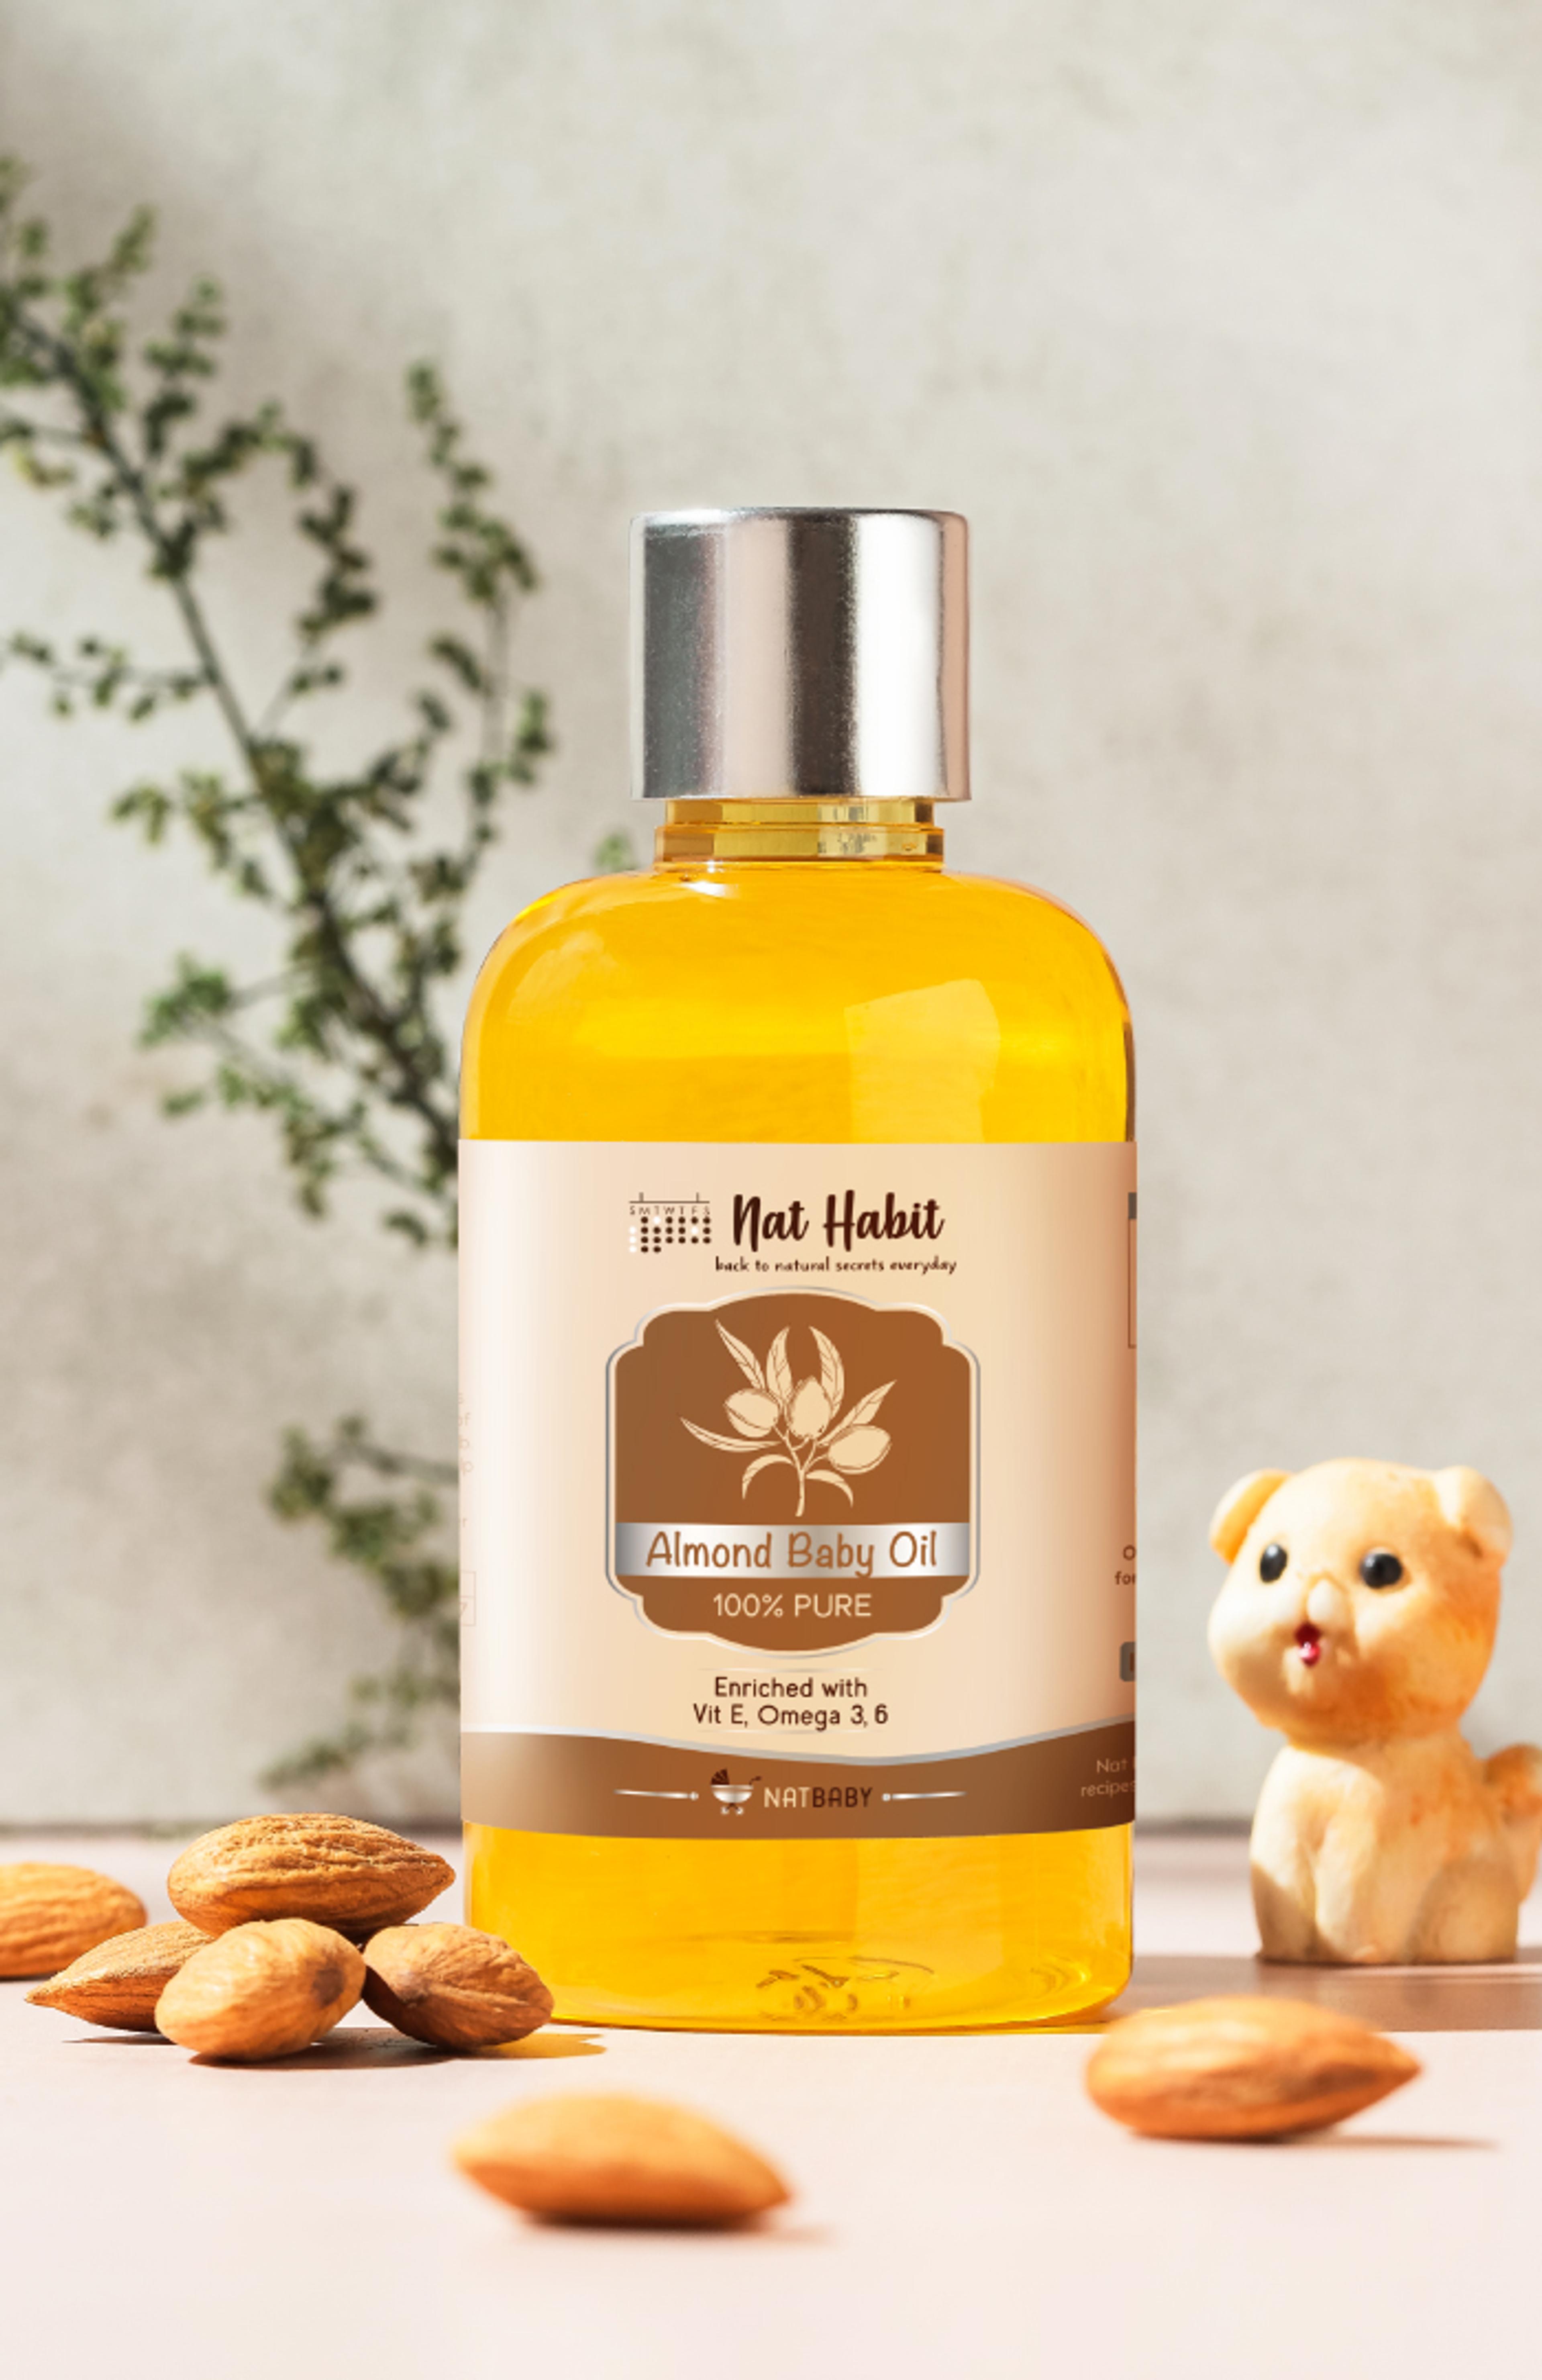 Almond-baby-oil-1